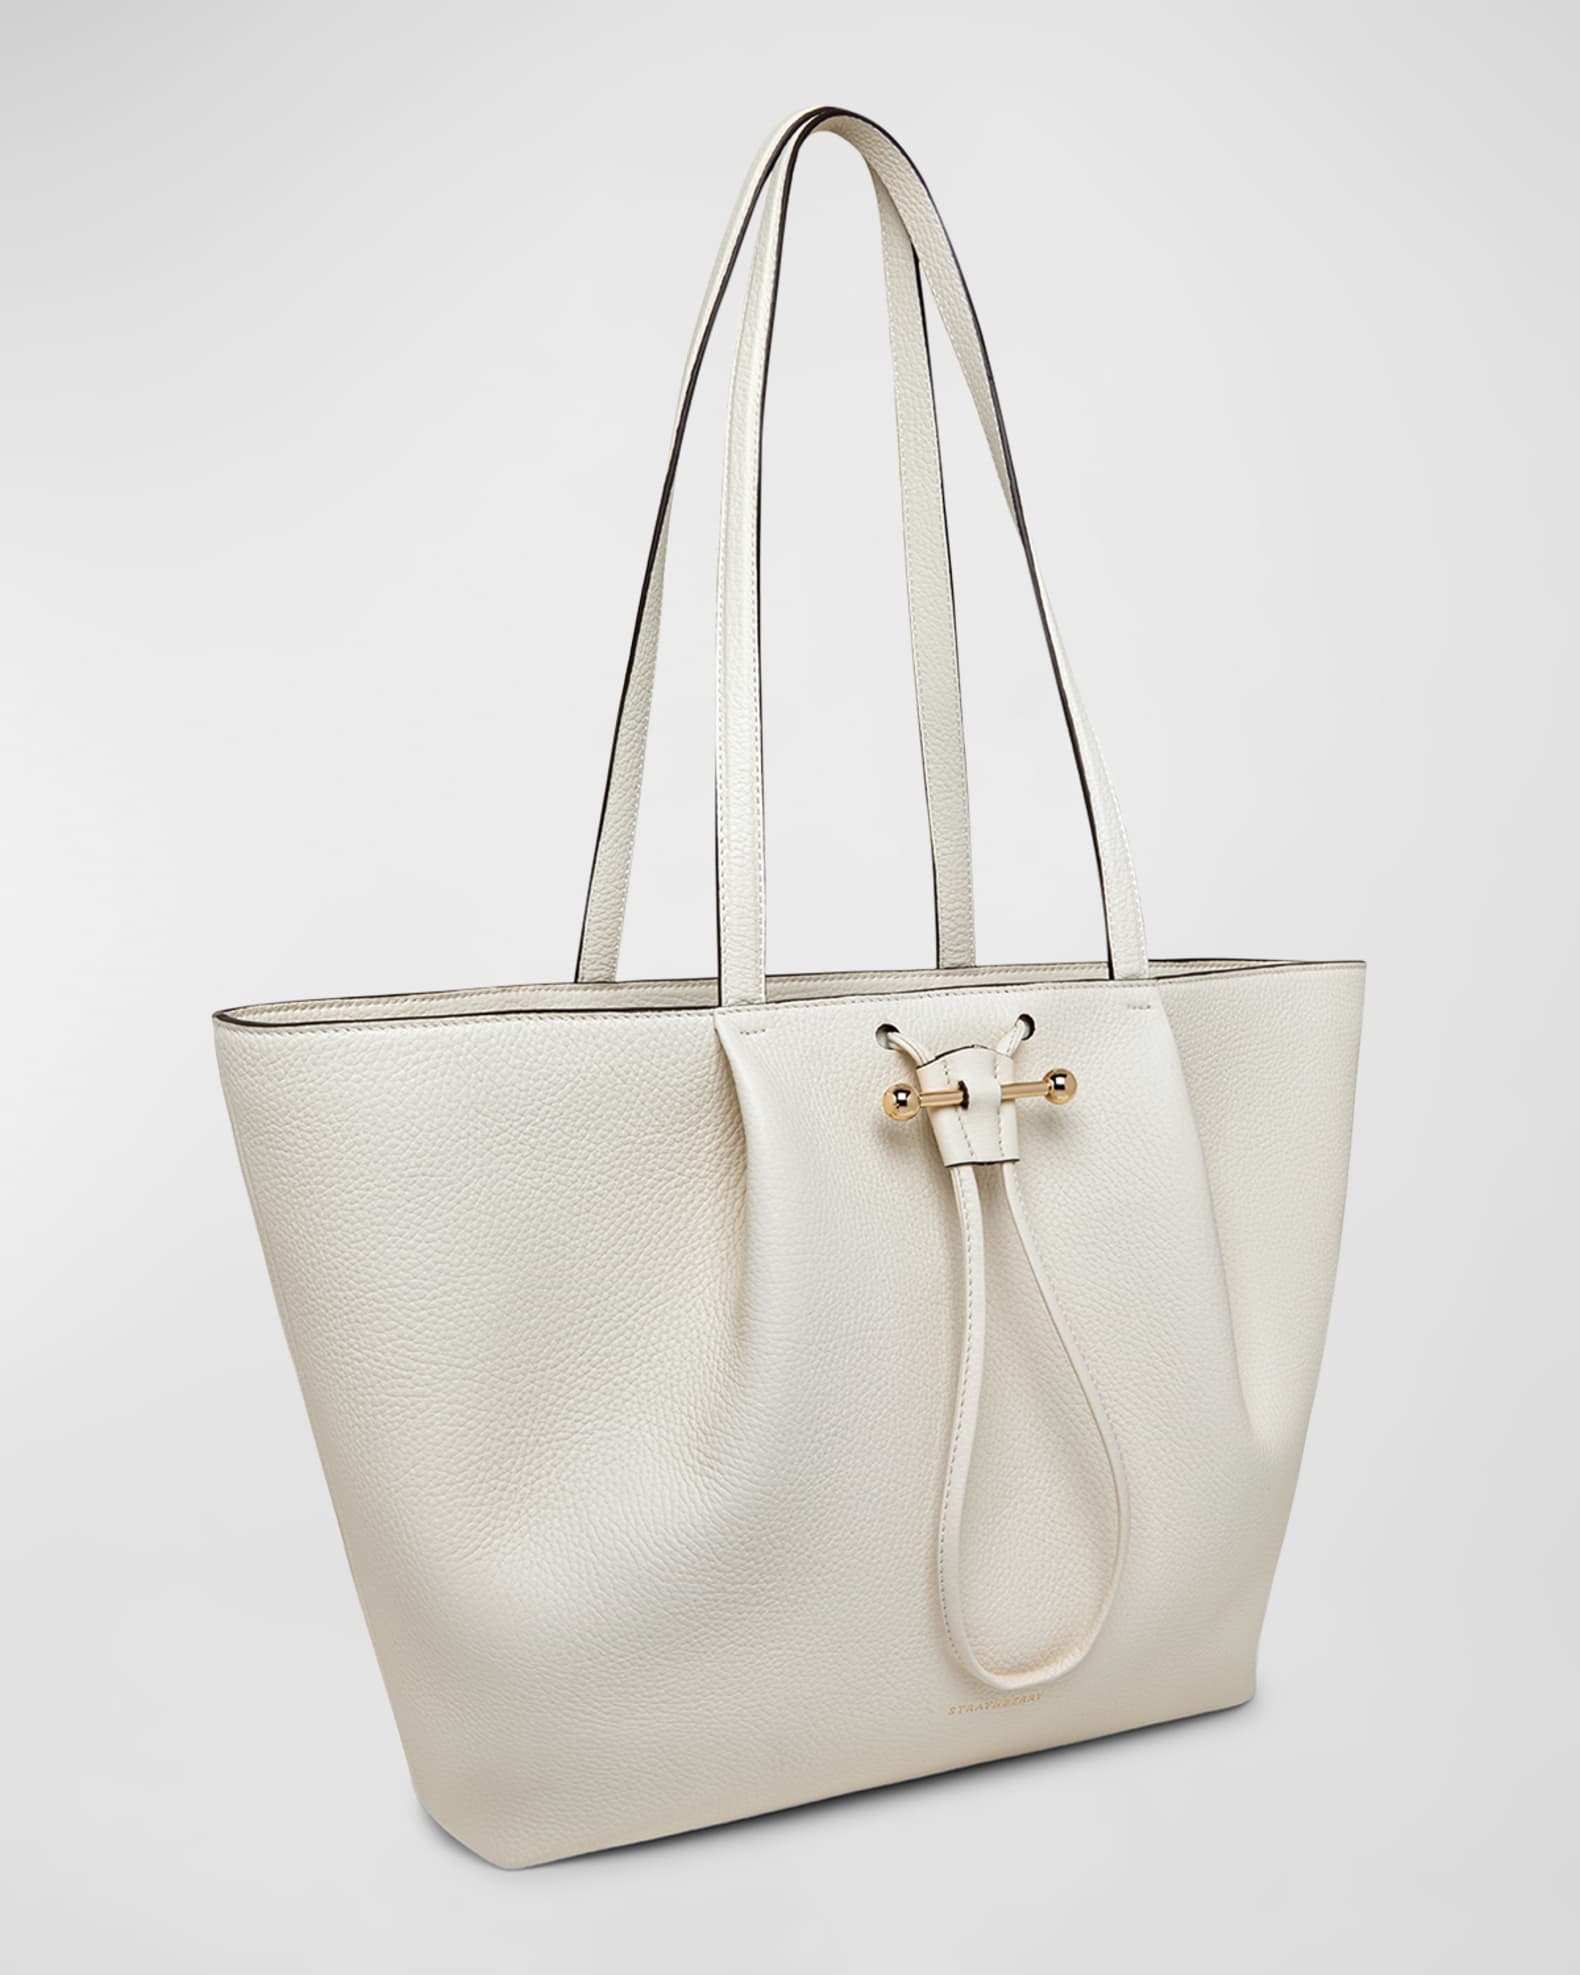 STRATHBERRY Osette Leather Shopper Tote Bag | Neiman Marcus